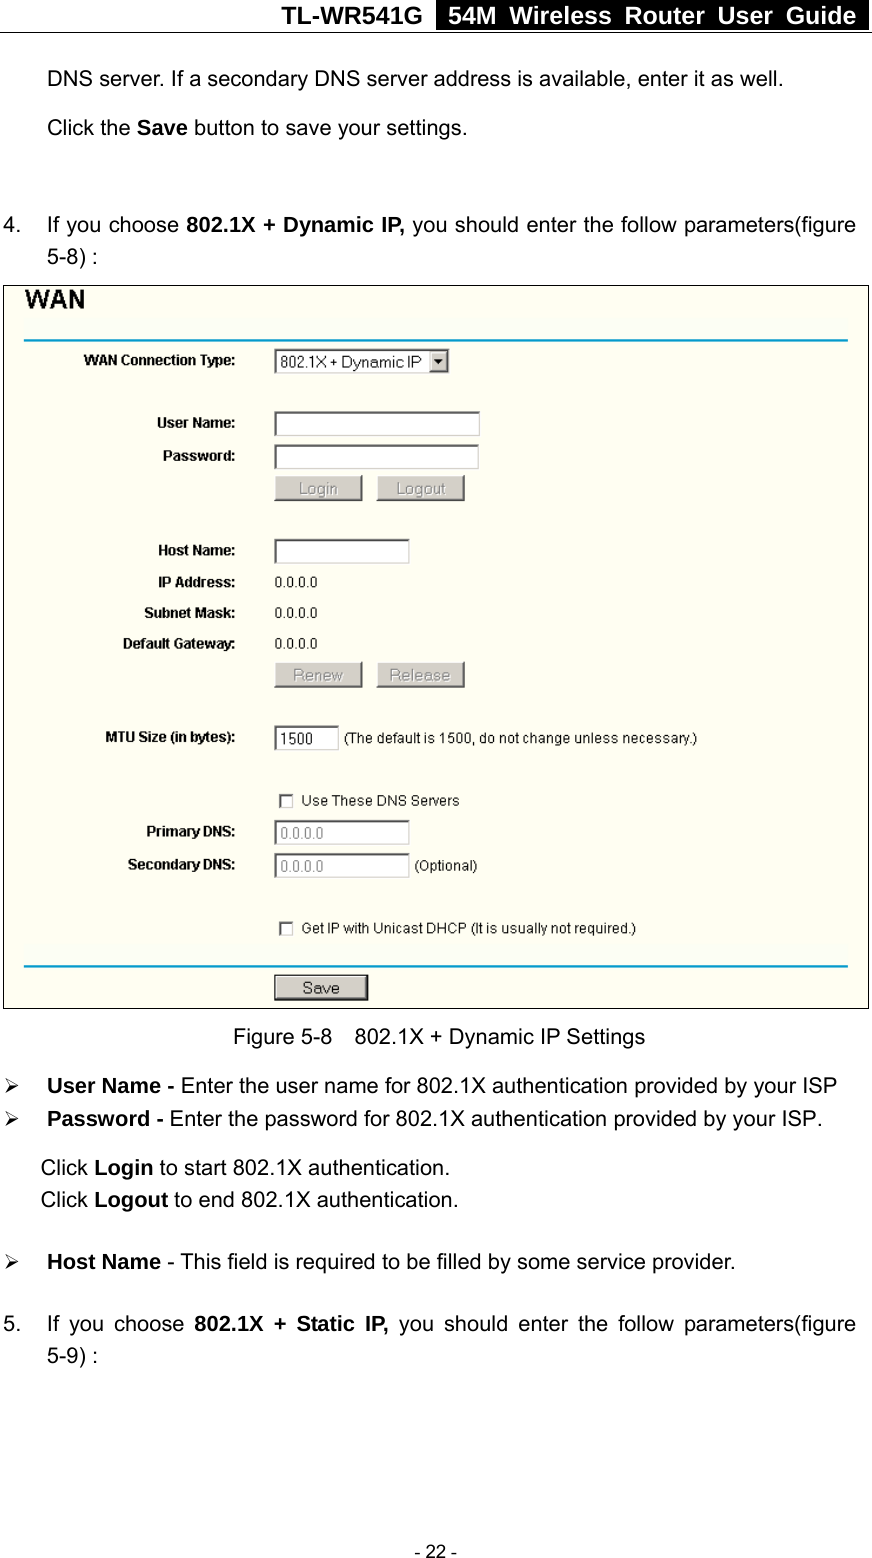 TL-WR541G   54M Wireless Router User Guide  DNS server. If a secondary DNS server address is available, enter it as well. Click the Save button to save your settings.  4.  If you choose 802.1X + Dynamic IP, you should enter the follow parameters(figure 5-8) :  Figure 5-8    802.1X + Dynamic IP Settings ¾ User Name - Enter the user name for 802.1X authentication provided by your ISP ¾ Password - Enter the password for 802.1X authentication provided by your ISP. Click Login to start 802.1X authentication. Click Logout to end 802.1X authentication. ¾ Host Name - This field is required to be filled by some service provider. 5.  If you choose 802.1X + Static IP, you should enter the follow parameters(figure 5-9) :  - 22 - 